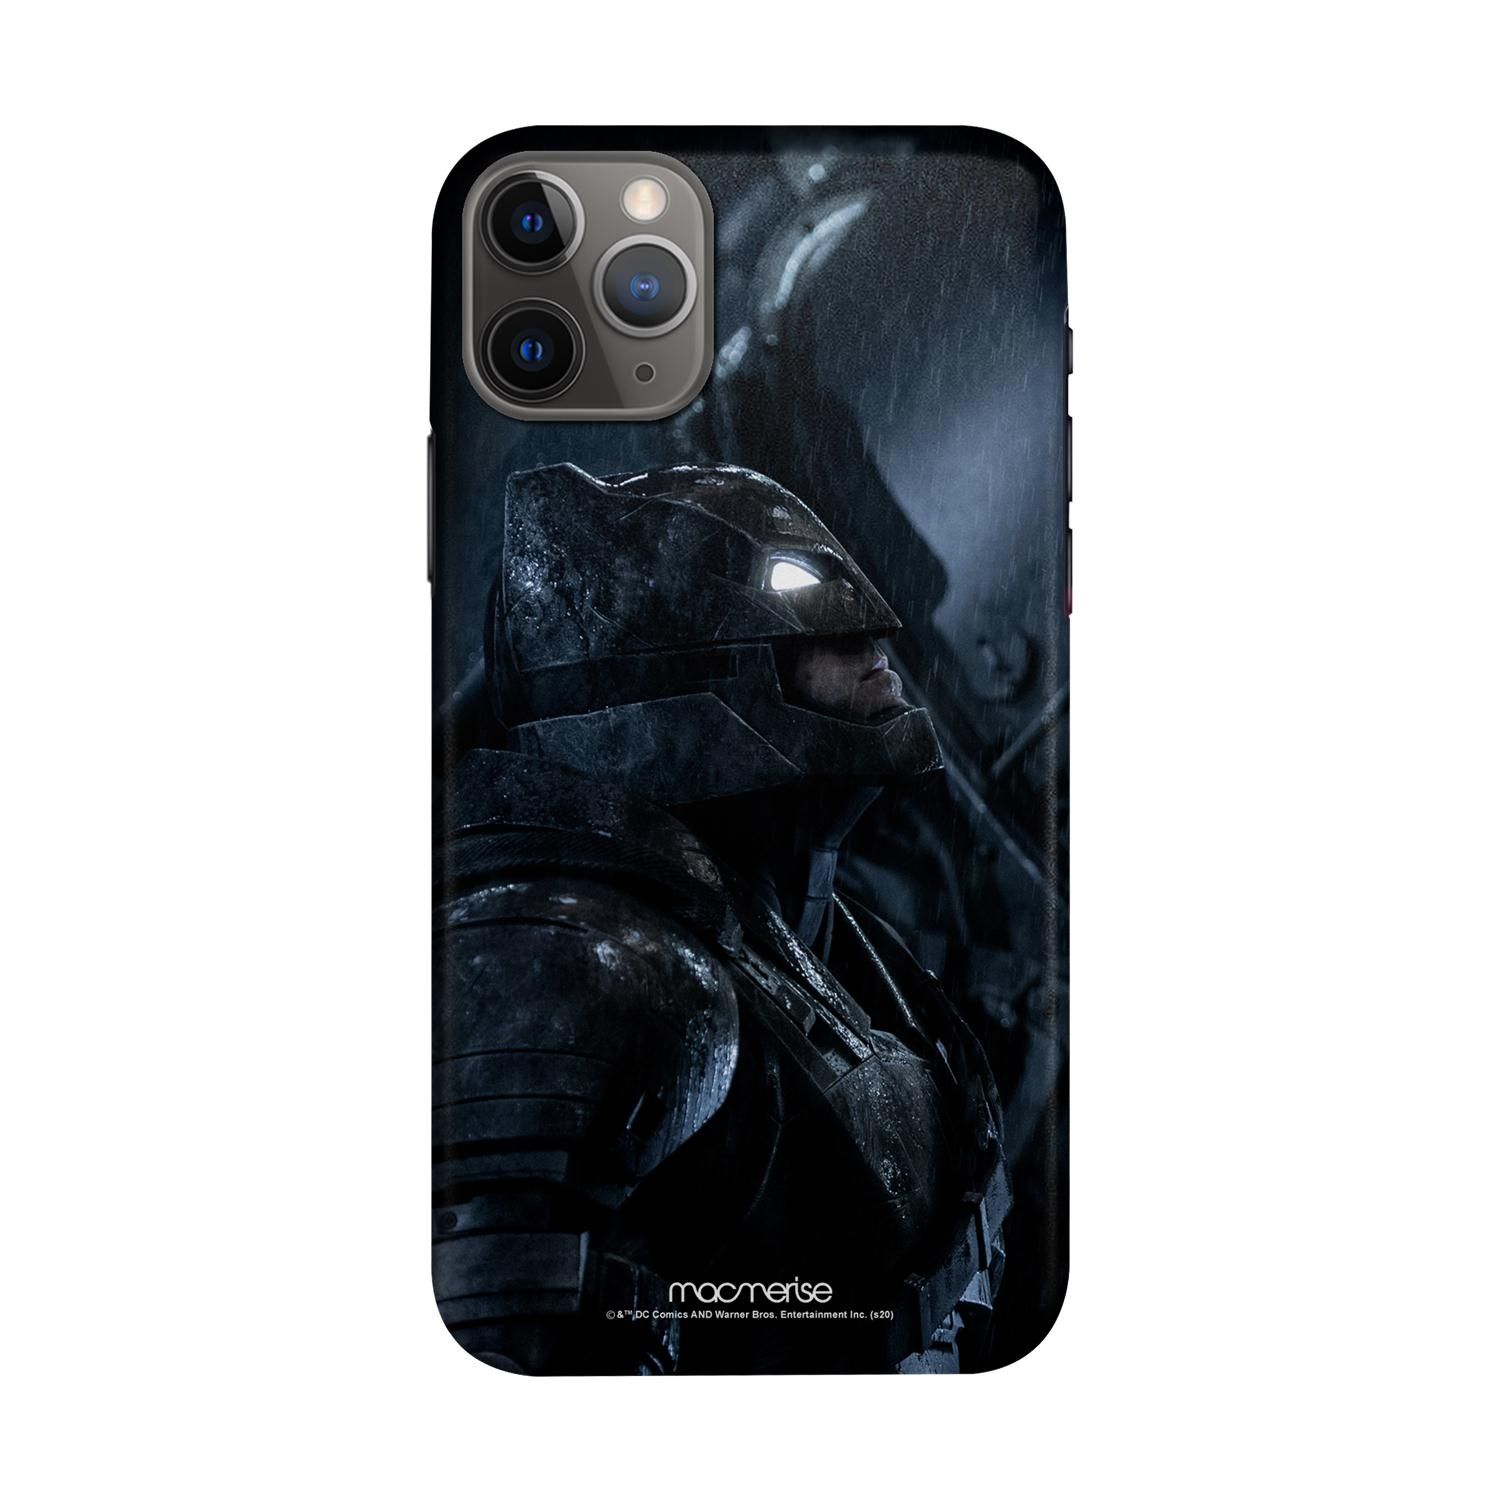 Buy The Victory Glance - Sleek Phone Case for iPhone 11 Pro Max Online